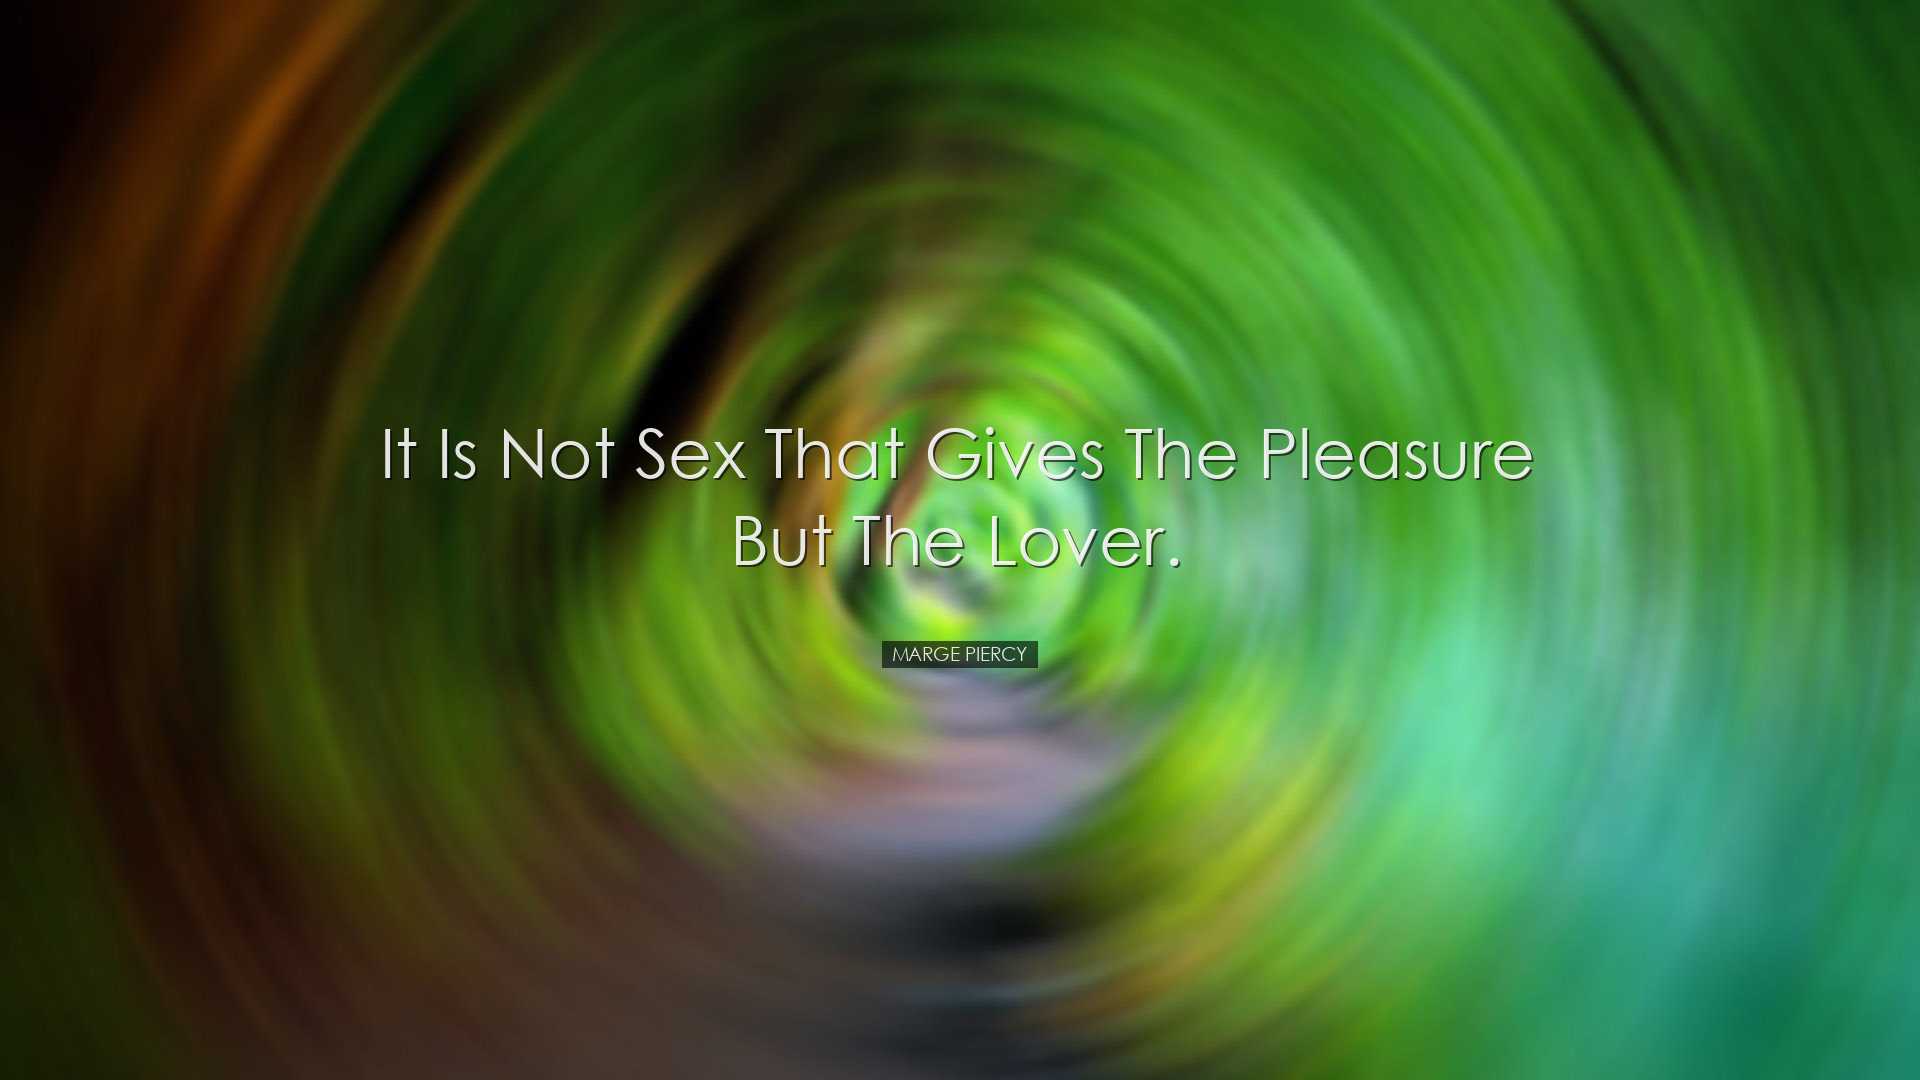 It is not sex that gives the pleasure but the lover. - Marge Pierc